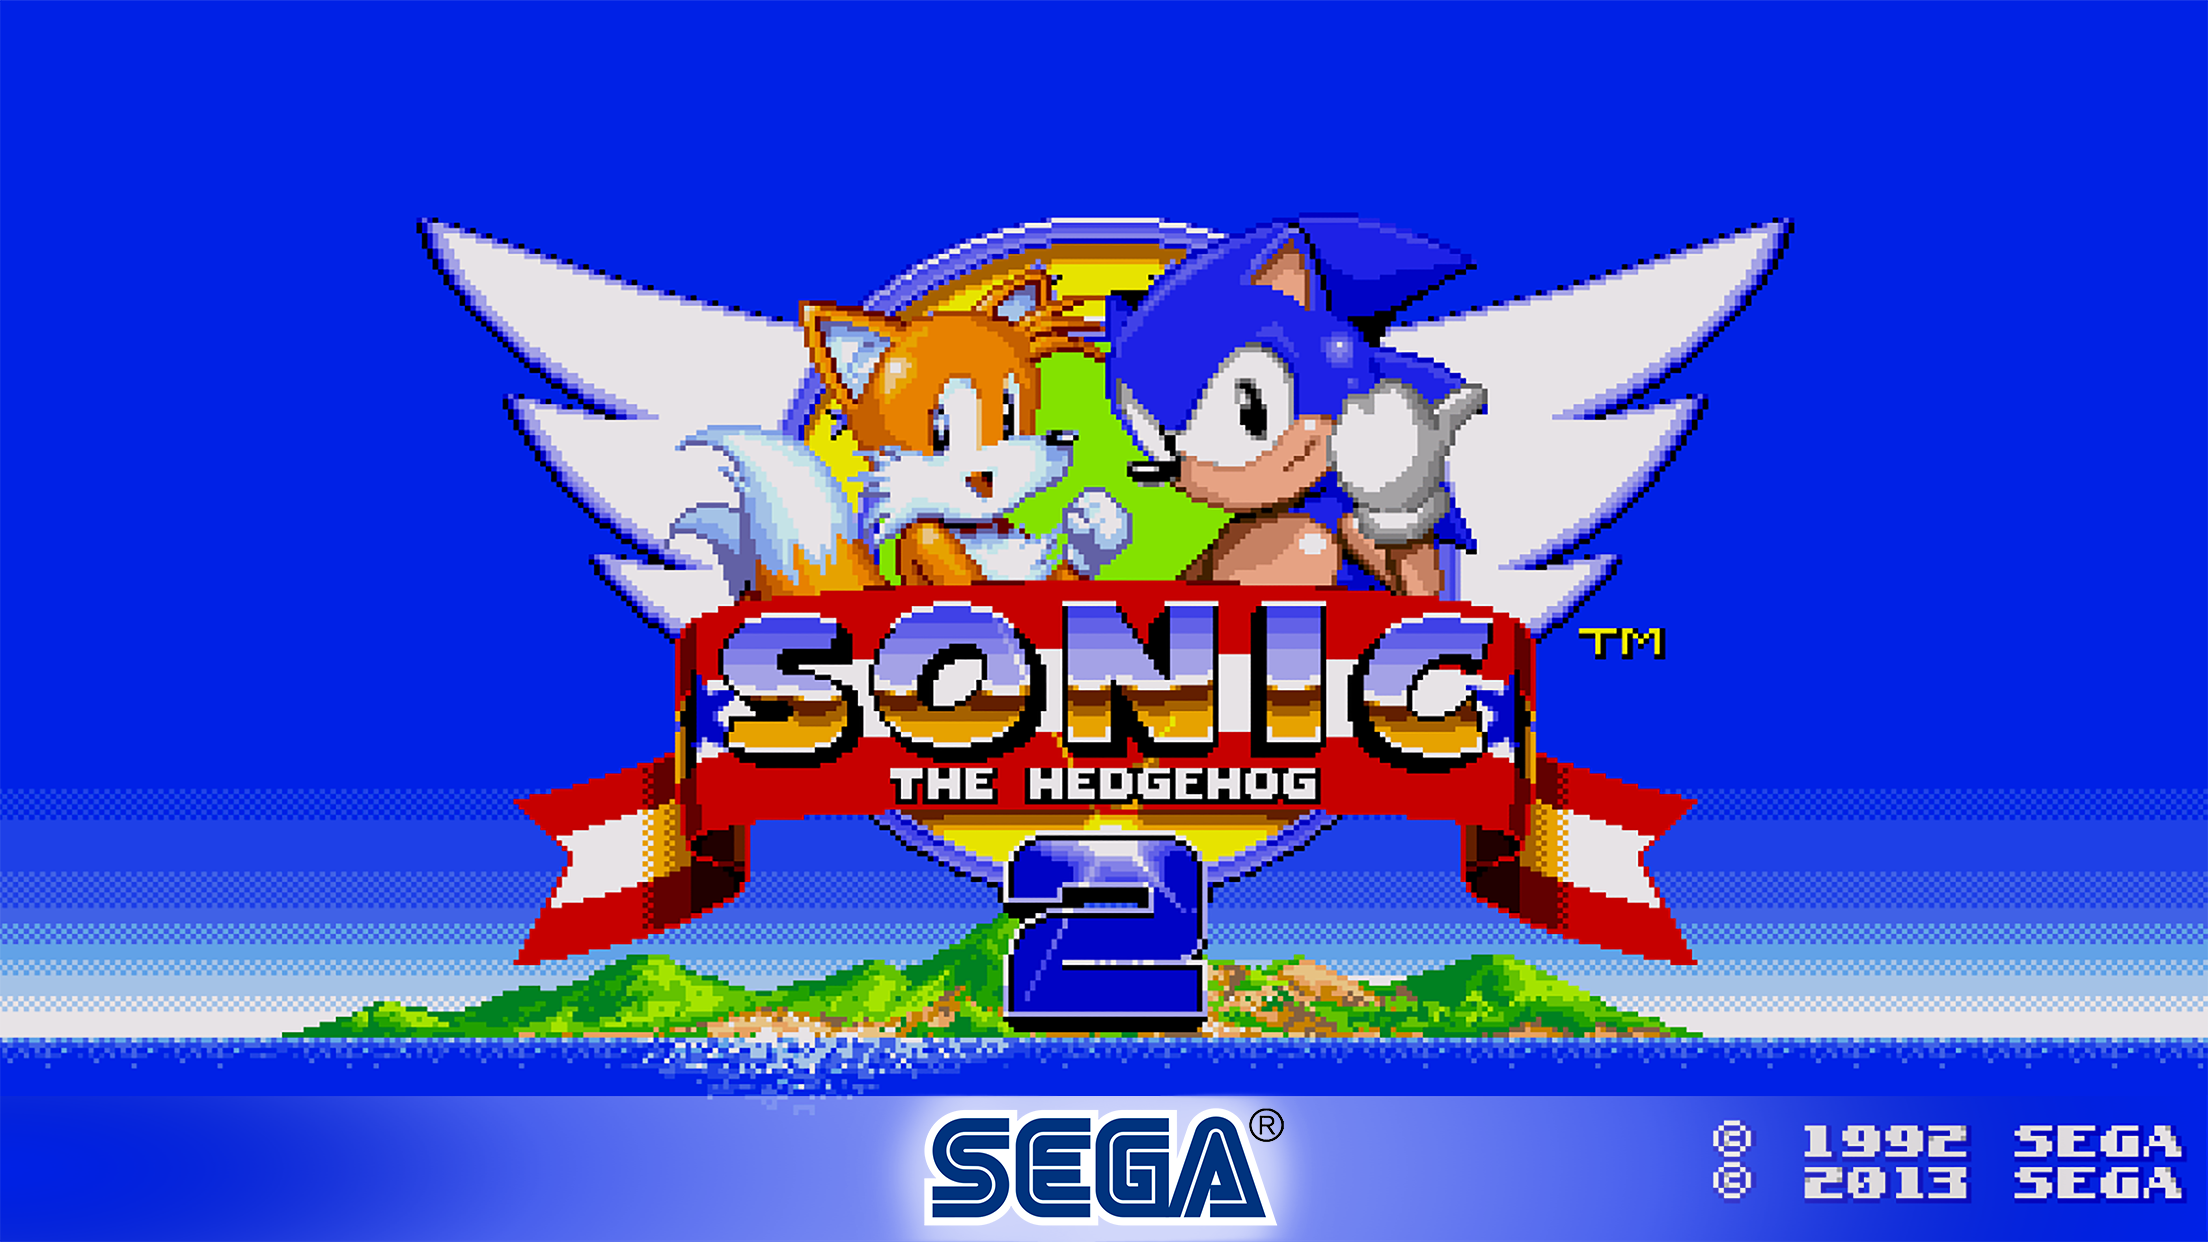 Sonic classic heroes para android 